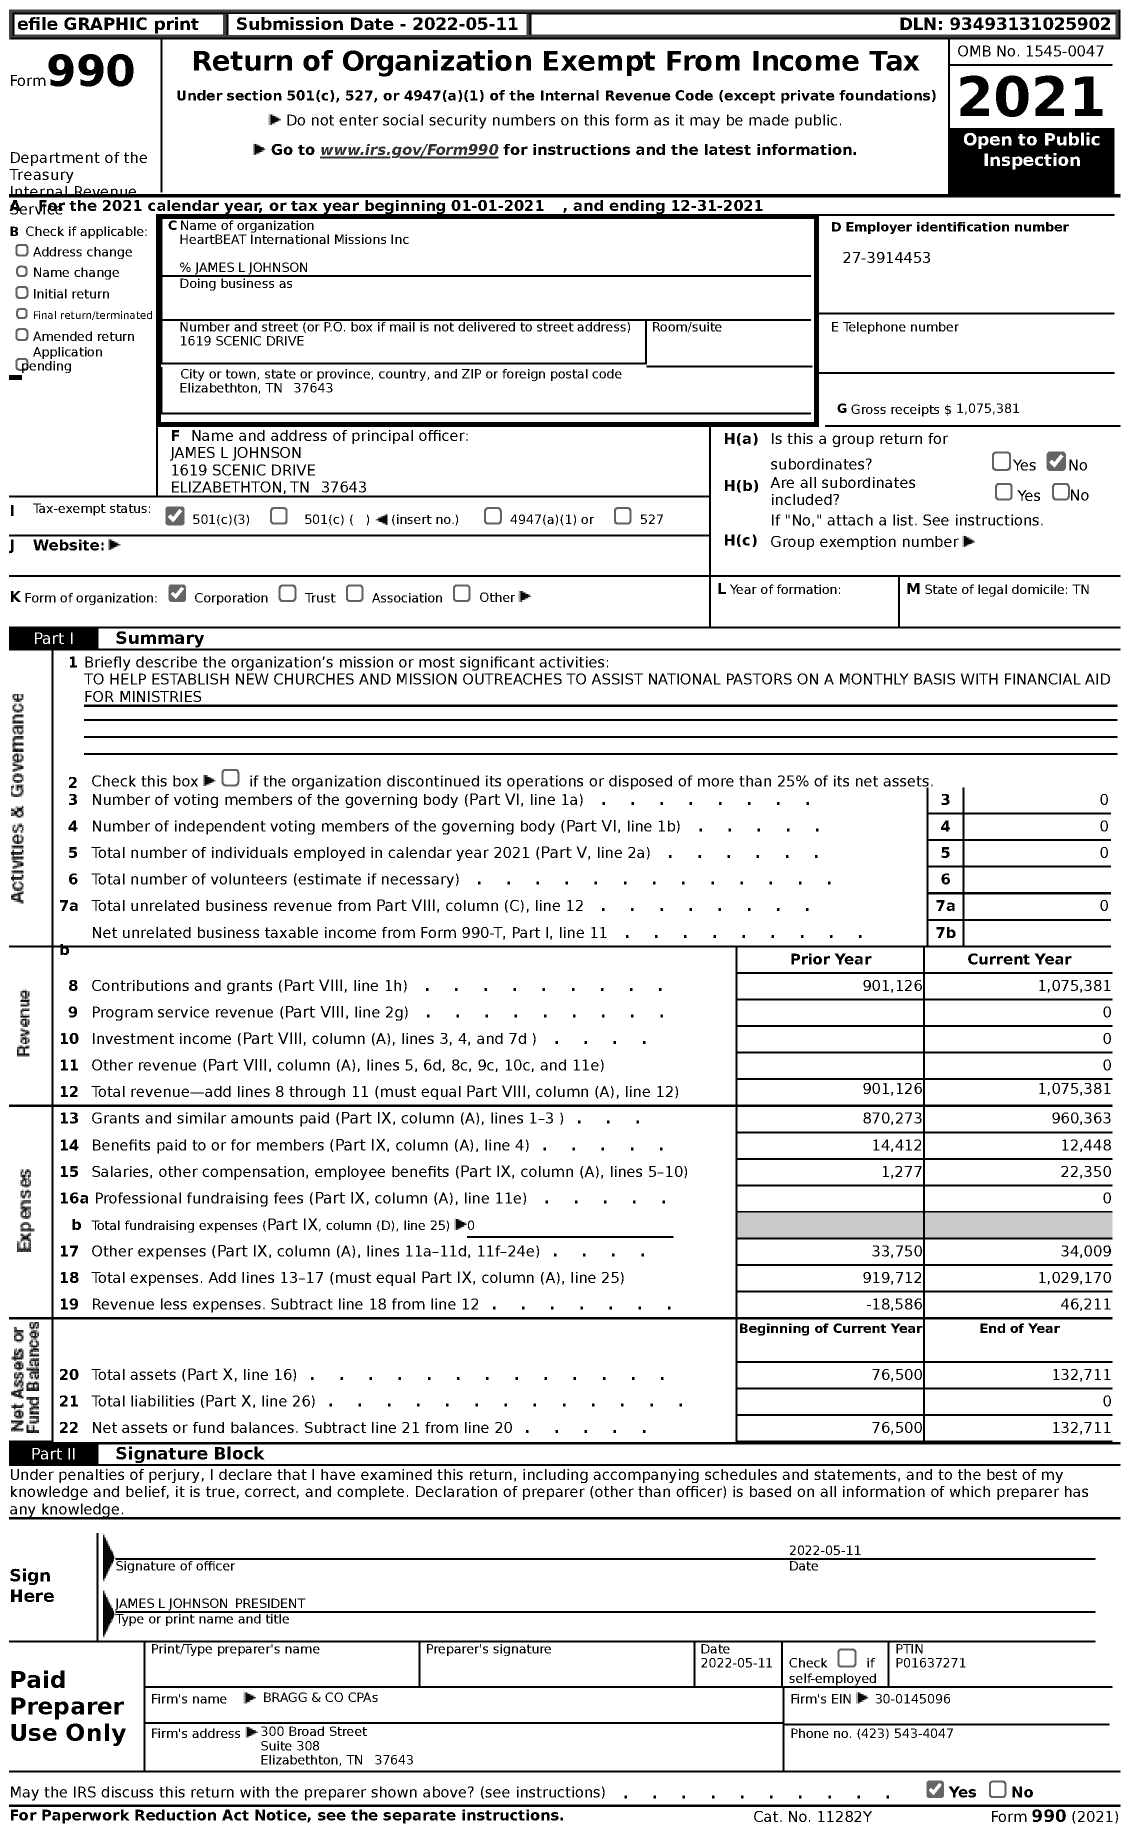 Image of first page of 2021 Form 990 for HeartBEAT International Missions